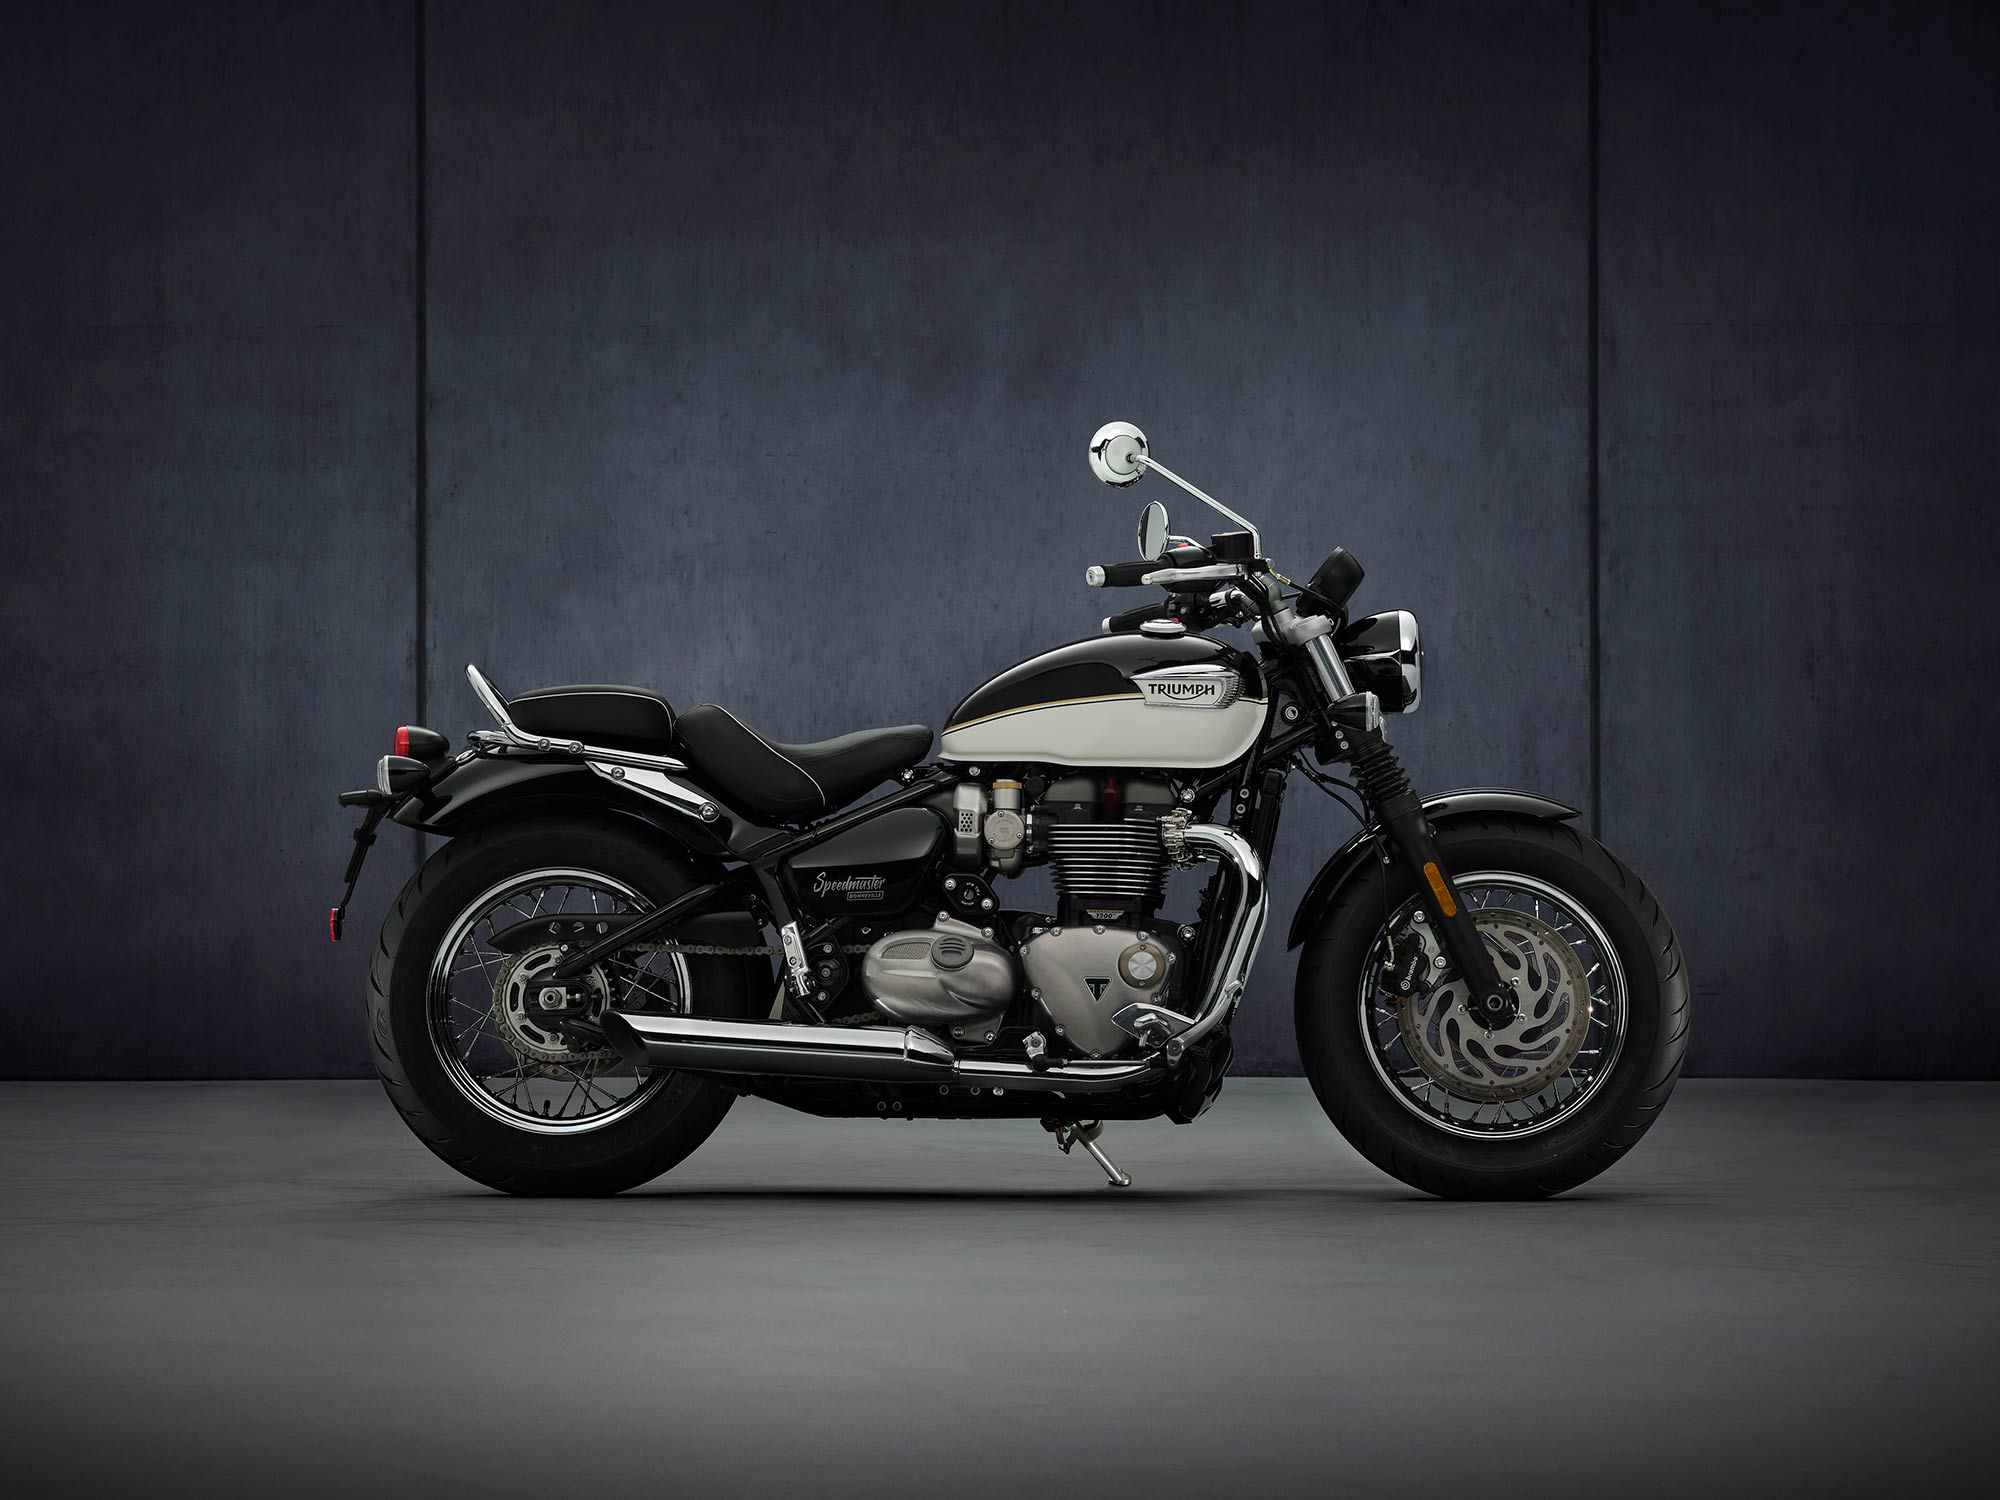 The Triumph Speedmaster is a great two-up bike with a few upgrades.